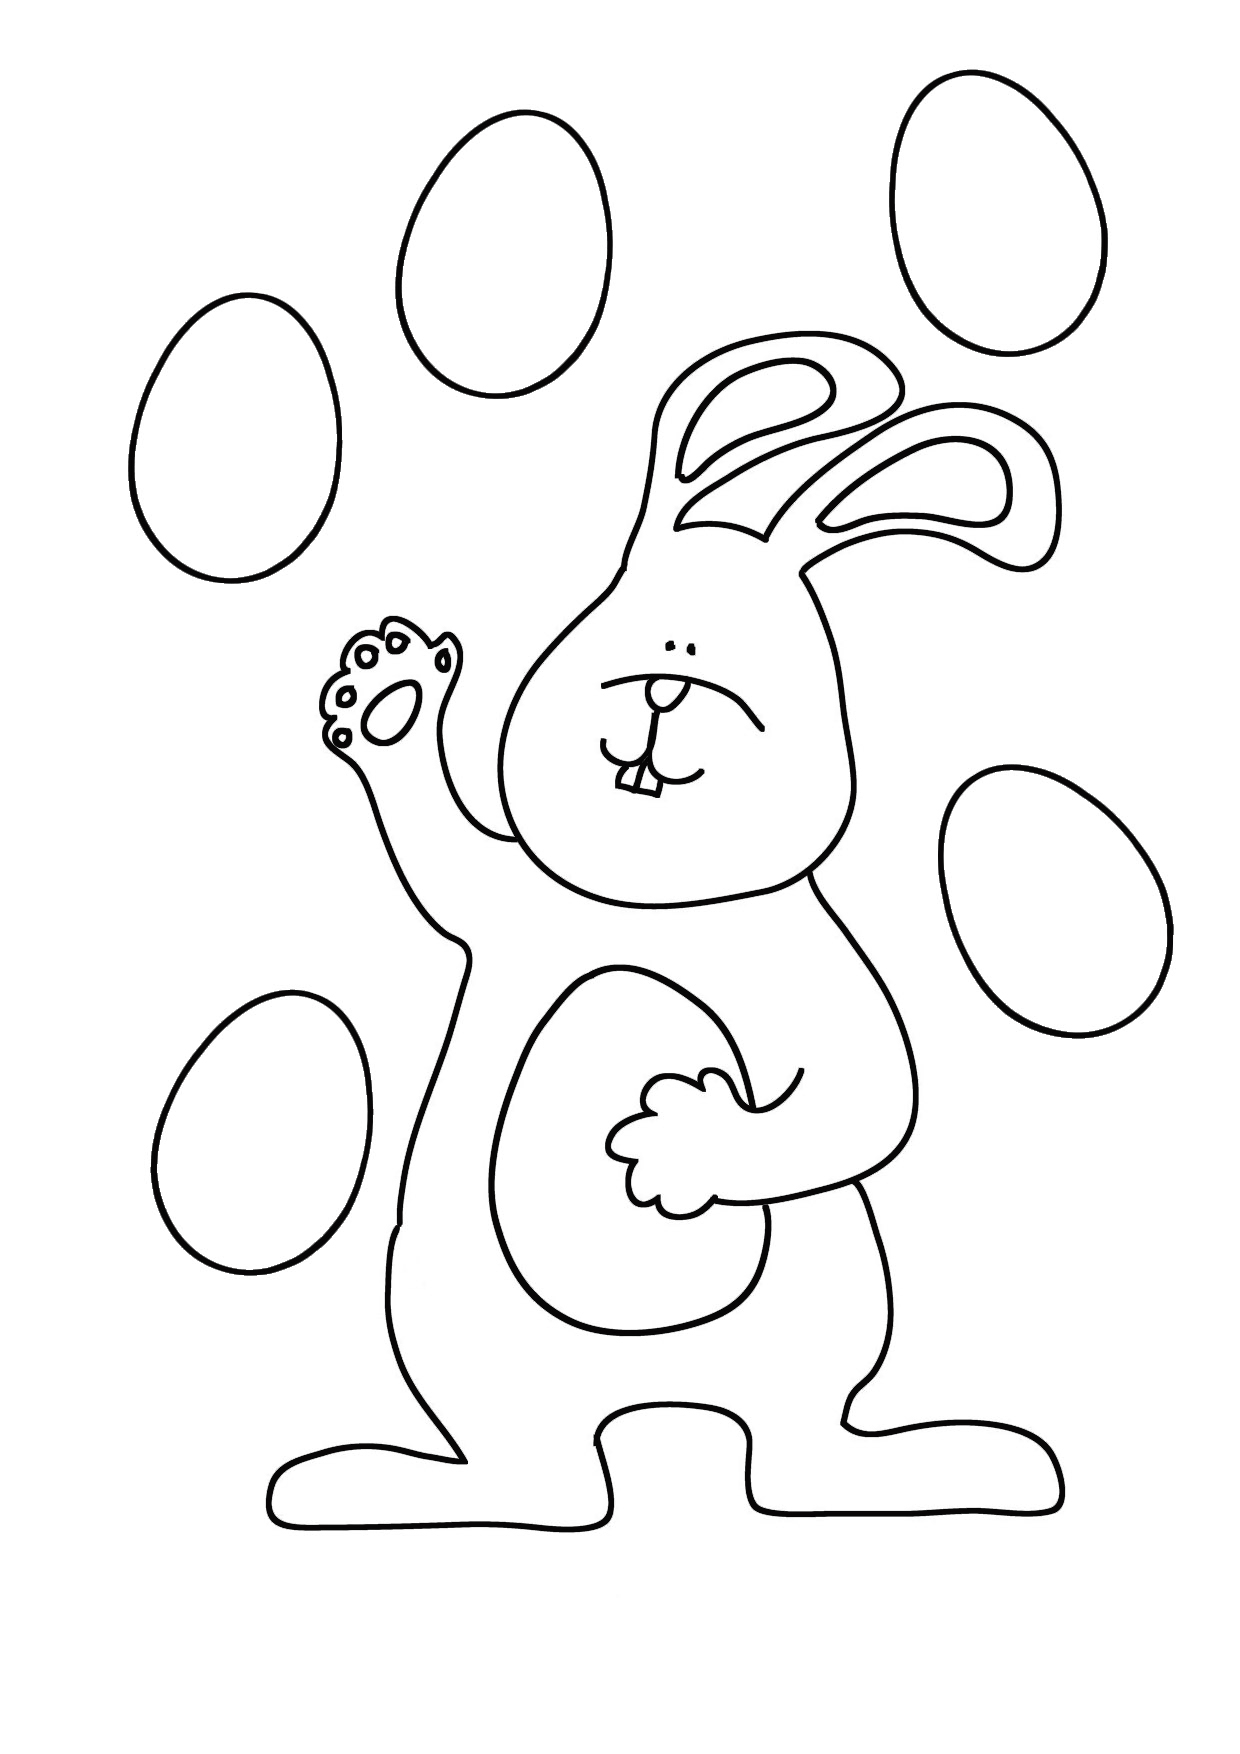 Easter bunny joggling with eggs